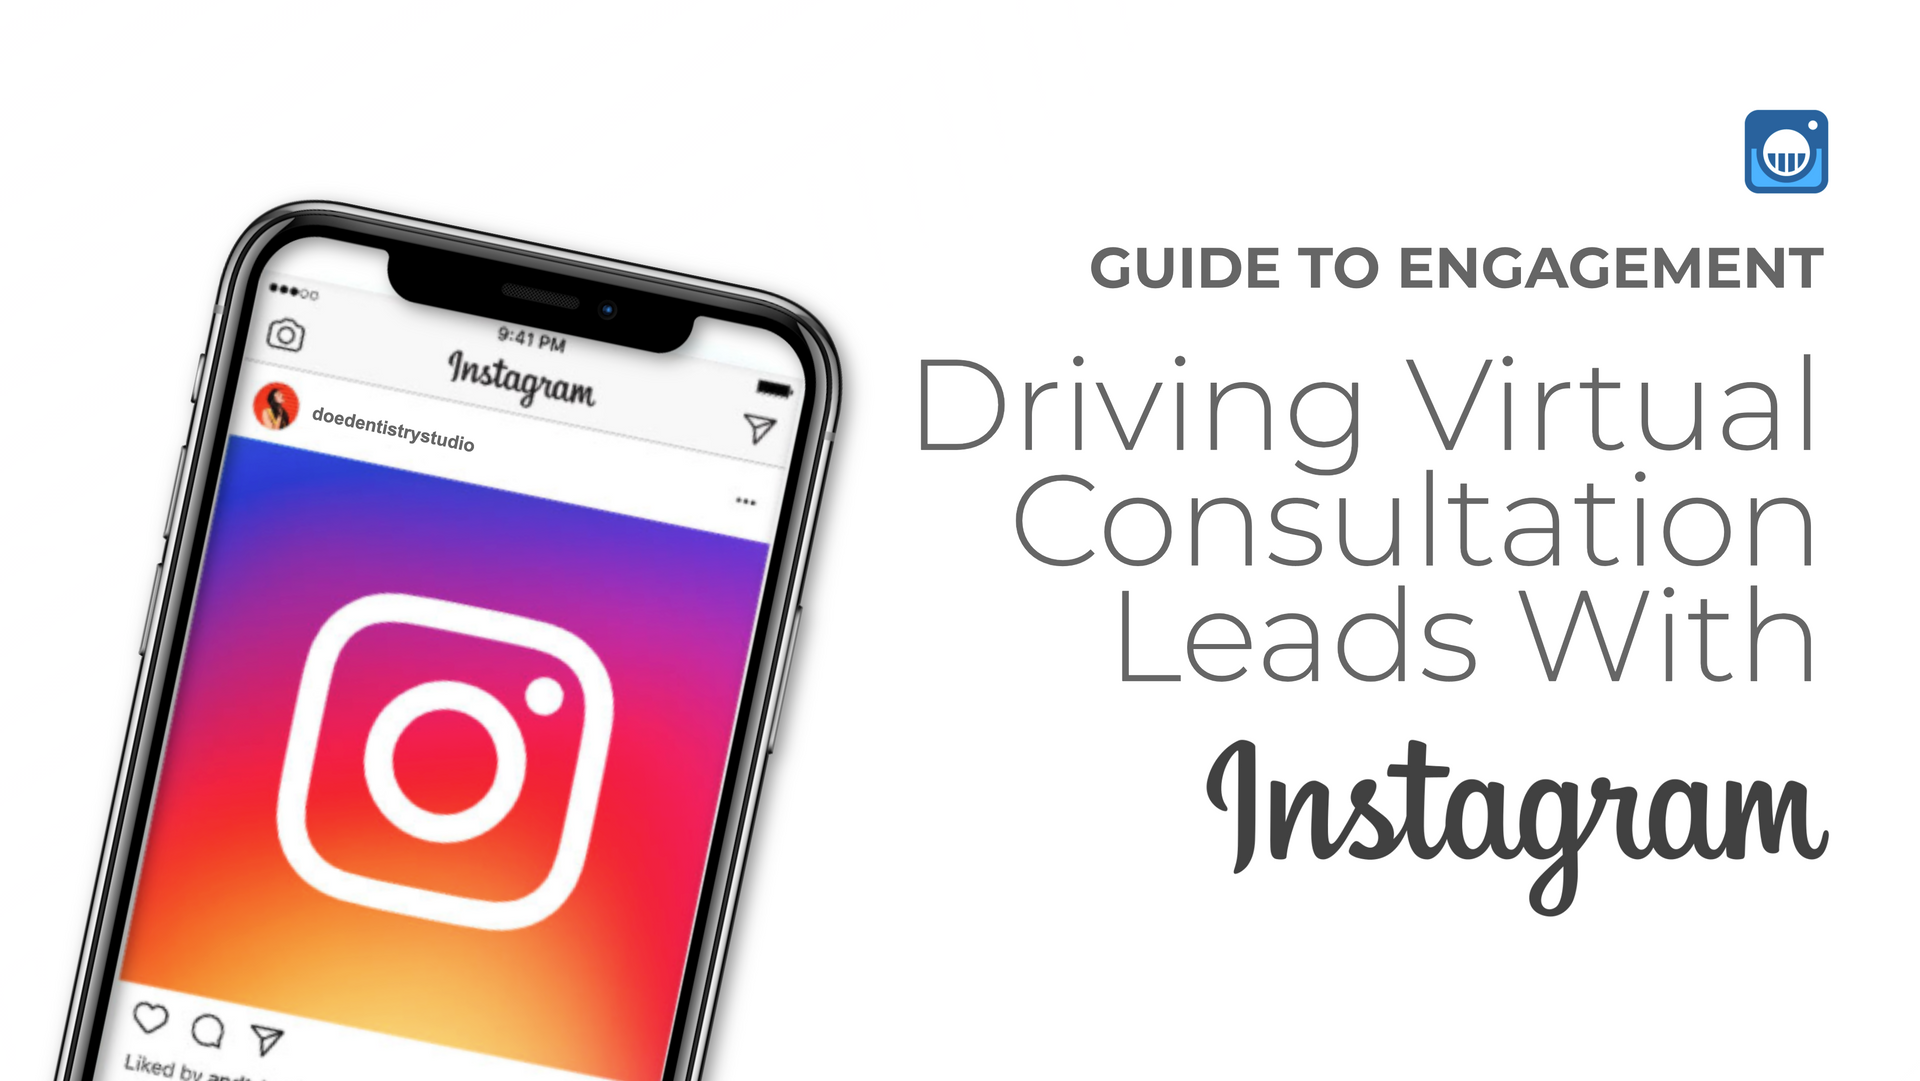 Driving Virtual Consultation Leads With Instagram